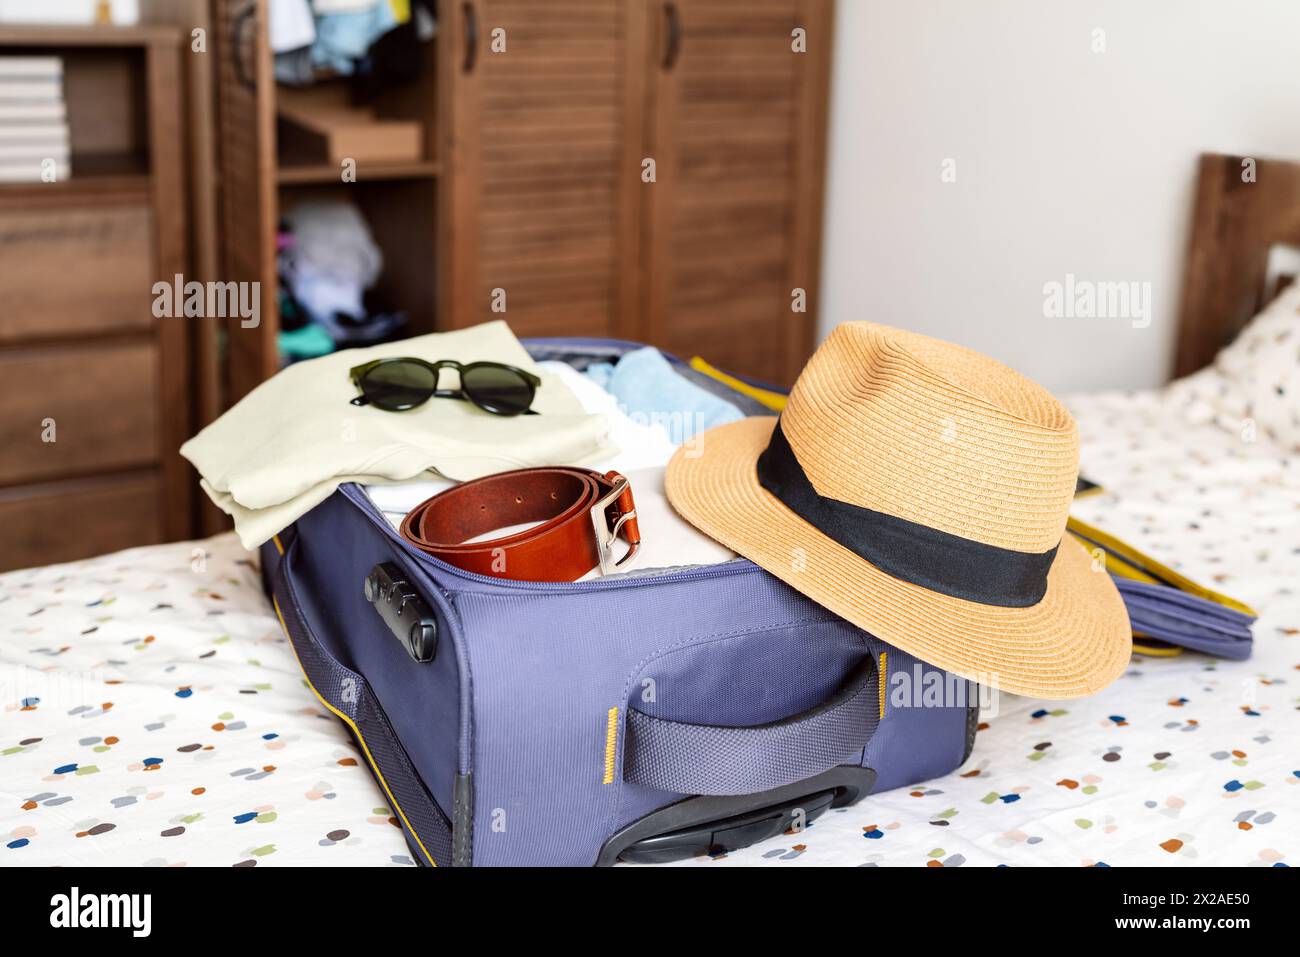 Packing a travel bag. Preparing baggage for the trip. Stock Photo